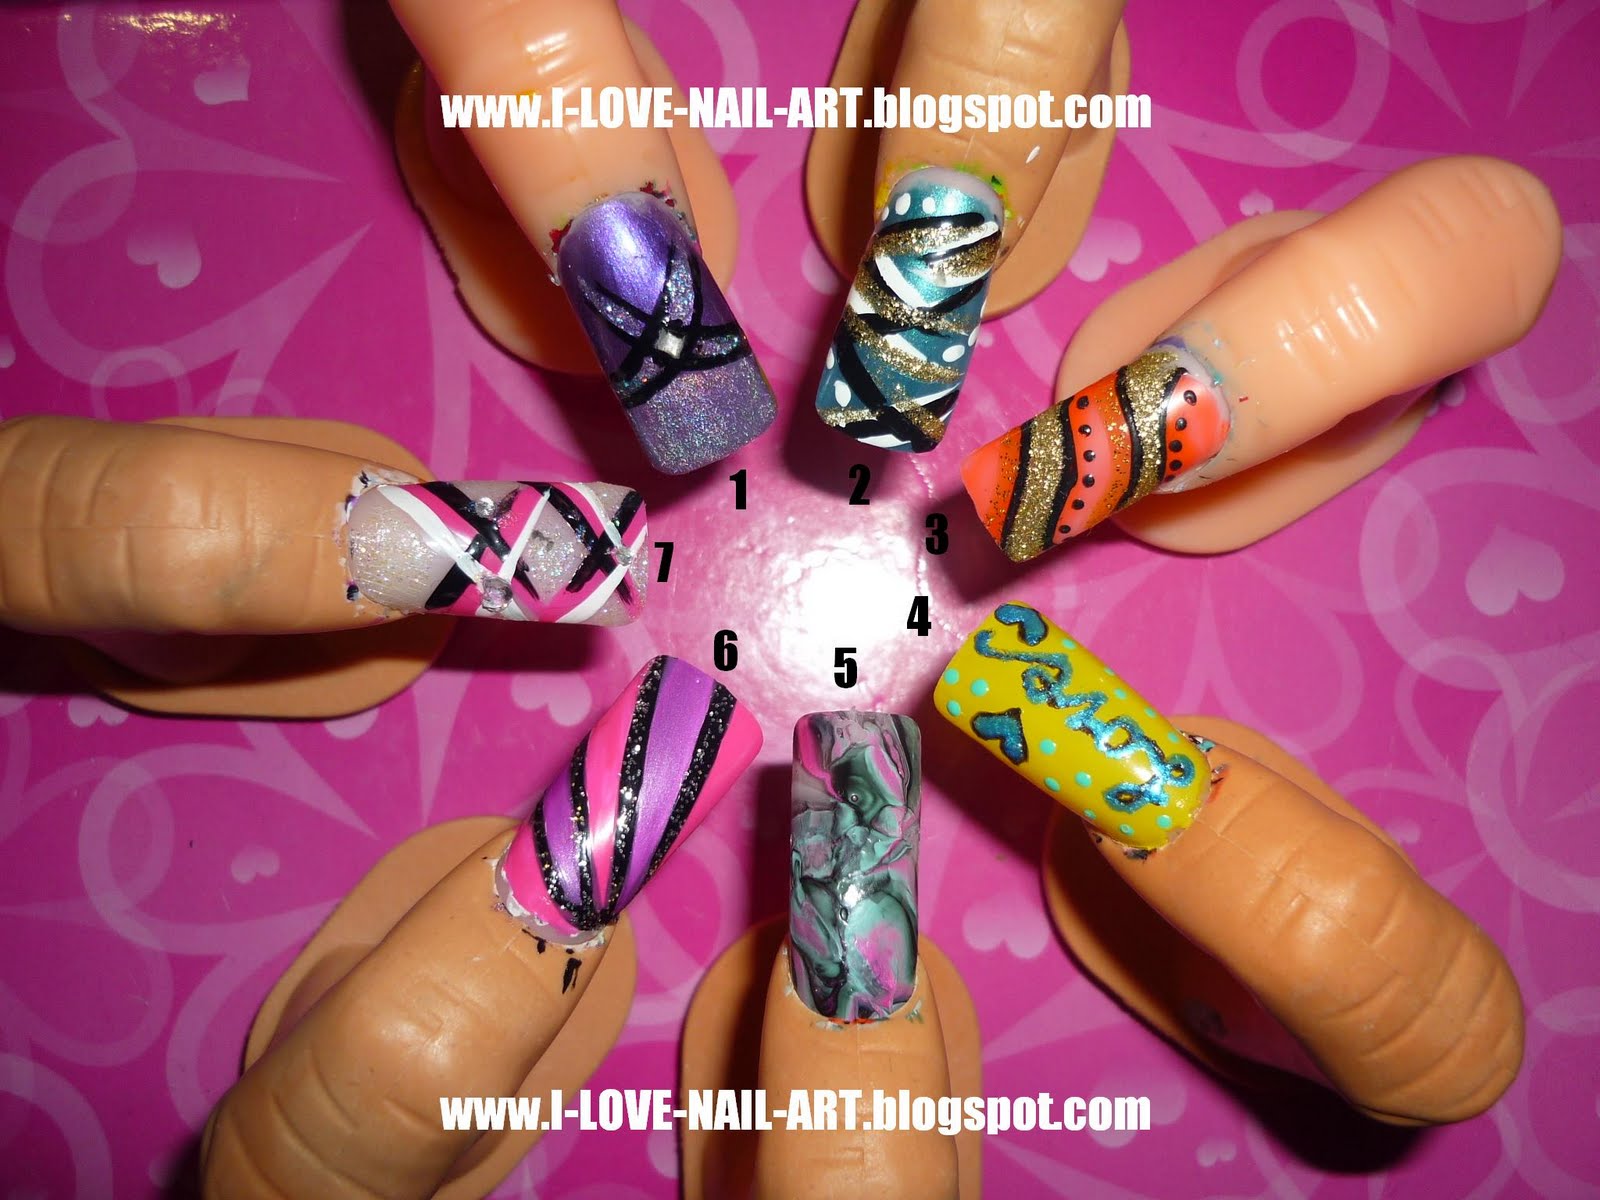 1. 50 Amazing Nail Art Designs for Beginners with Pictures - wide 7